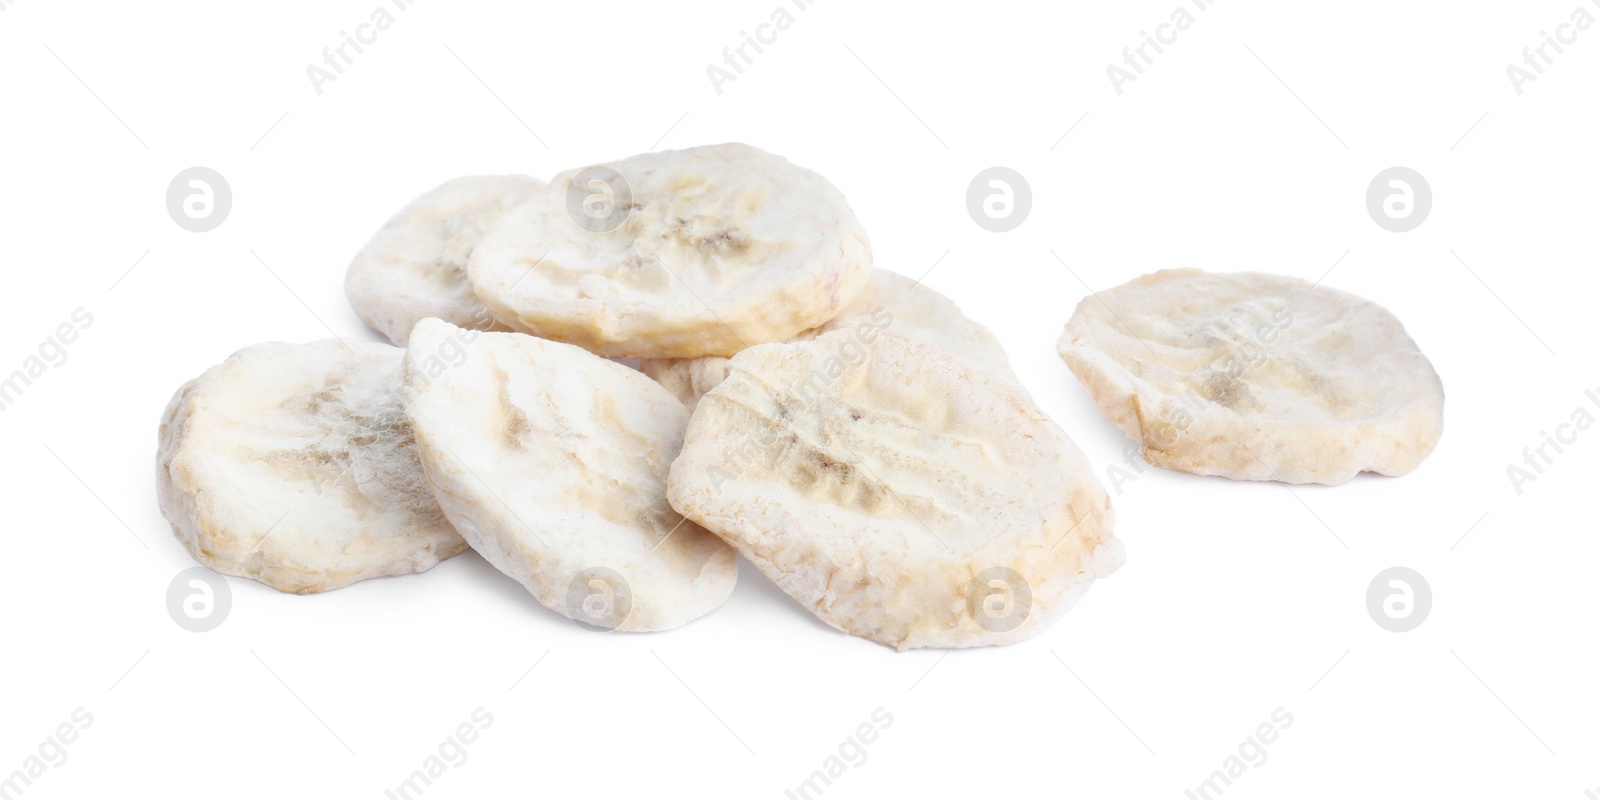 Photo of Pile of freeze dried bananas on white background